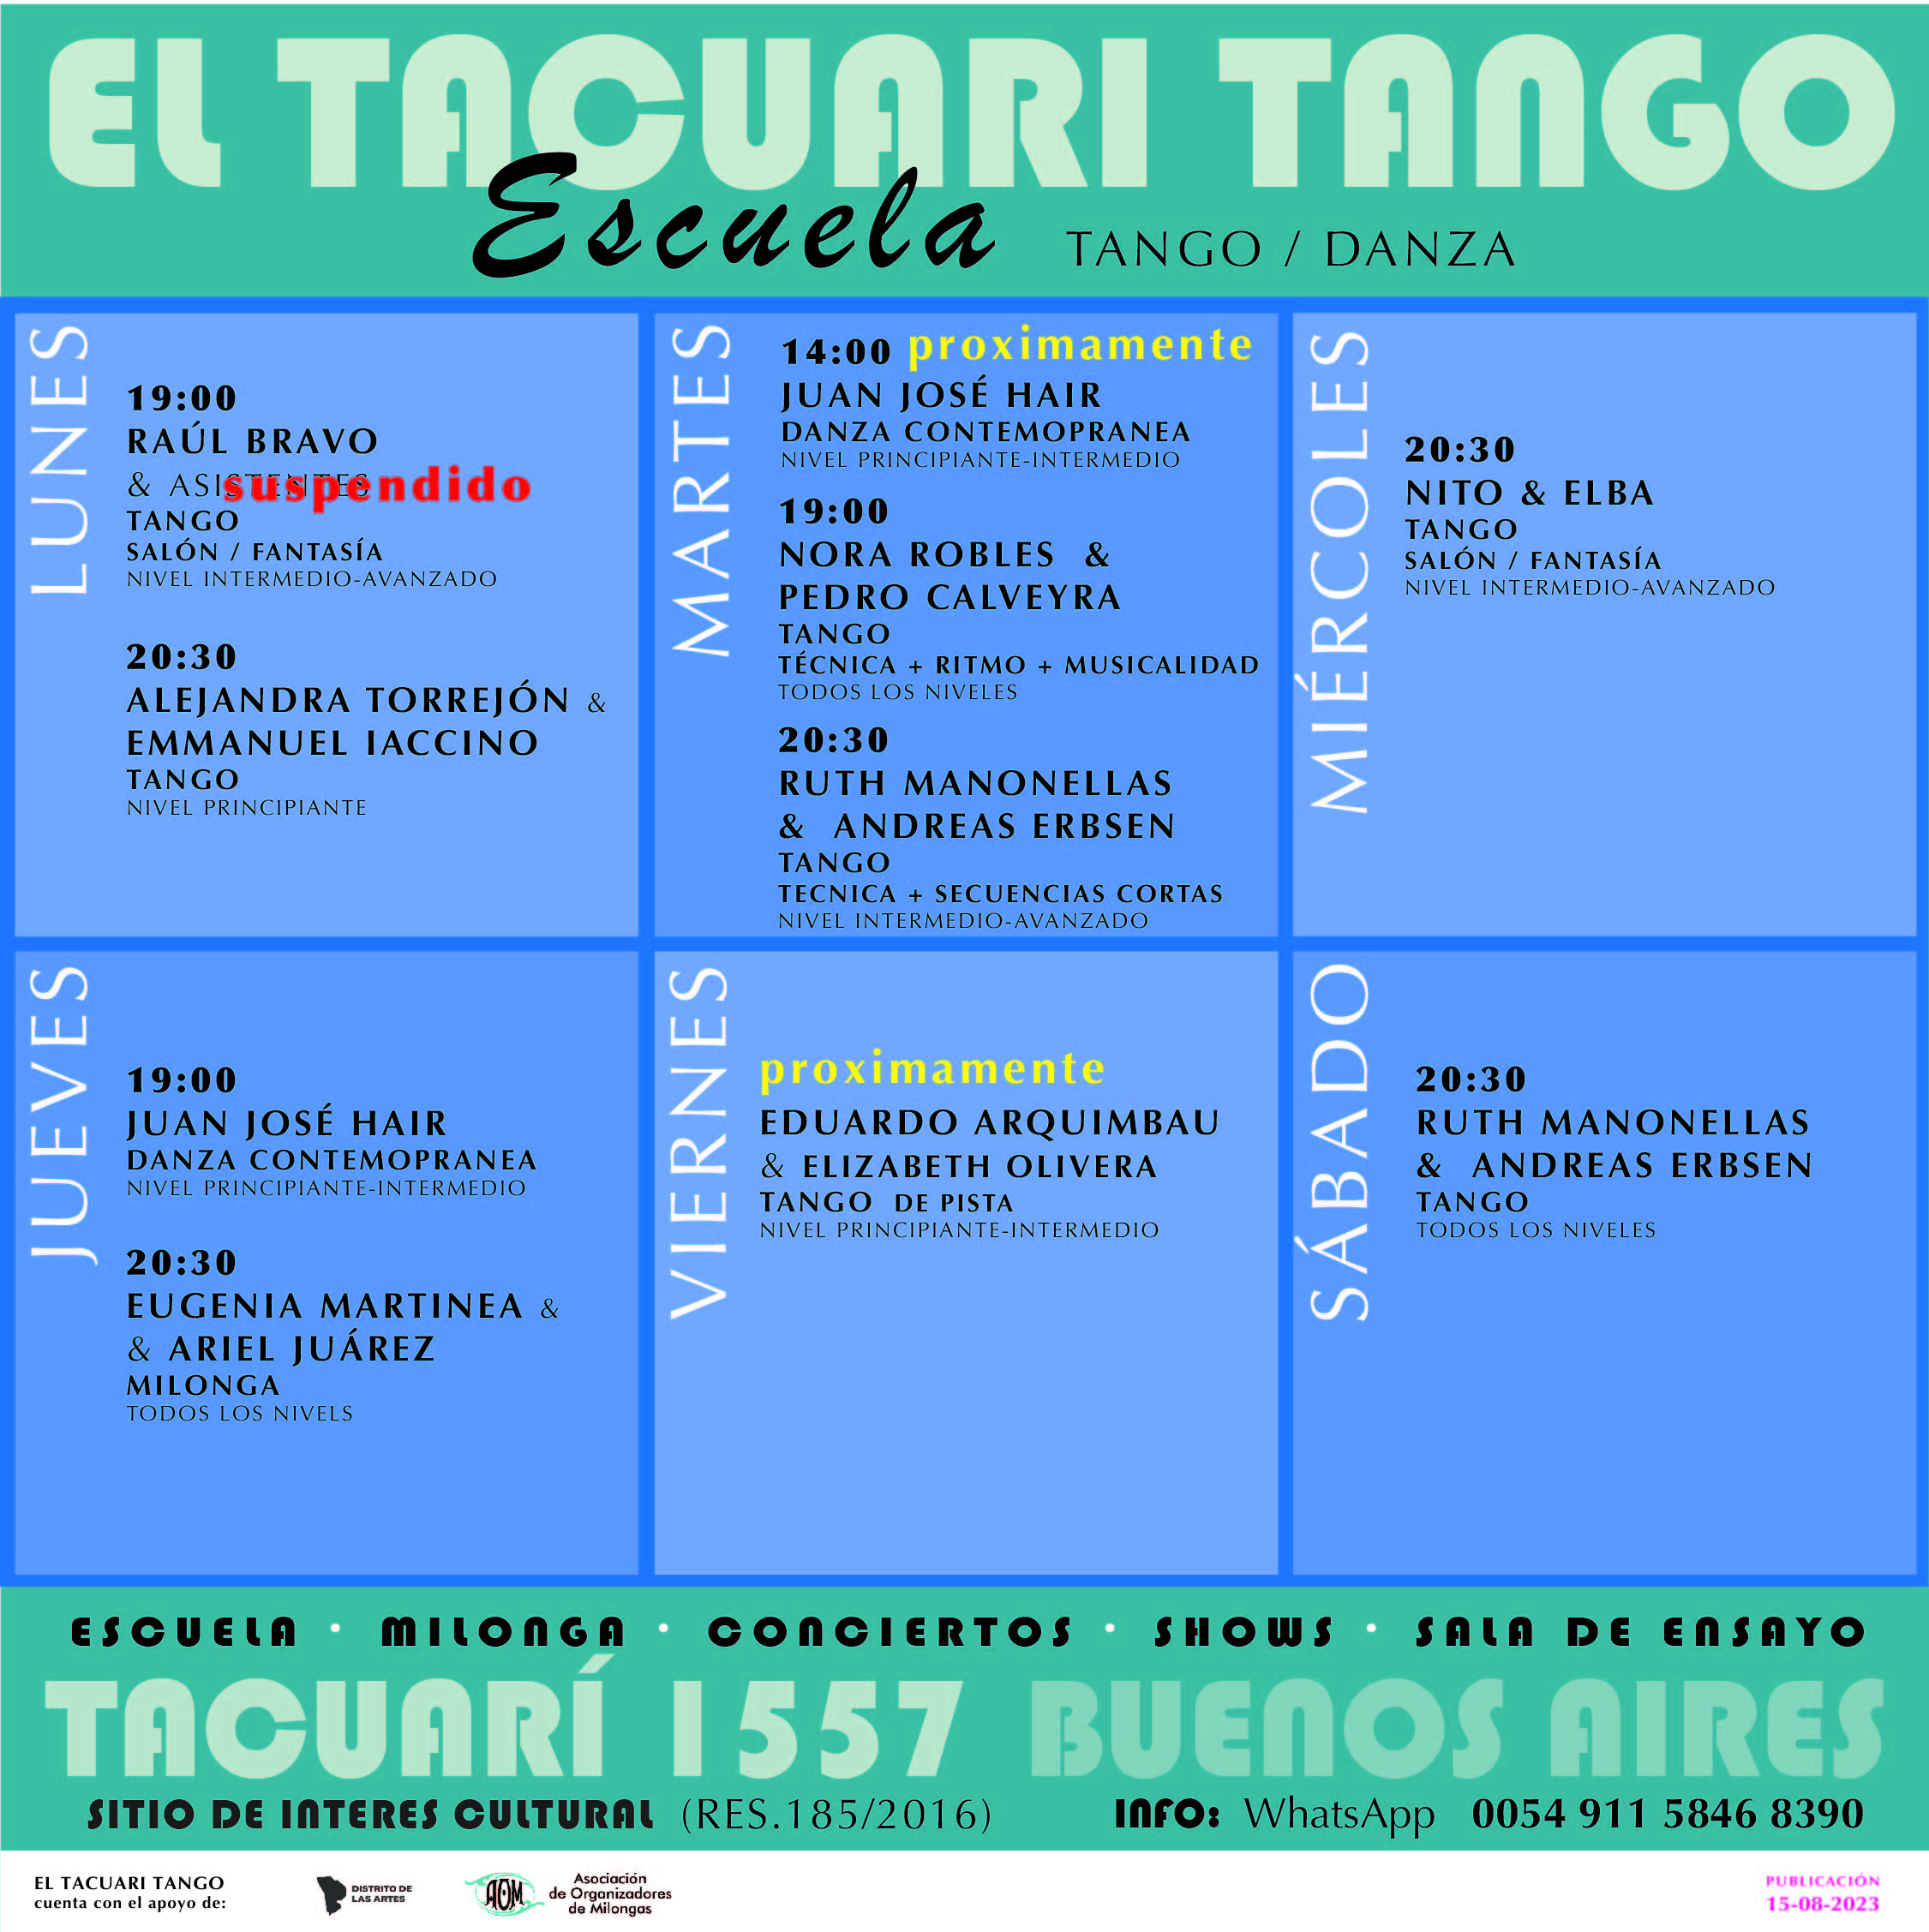 info about tango clases